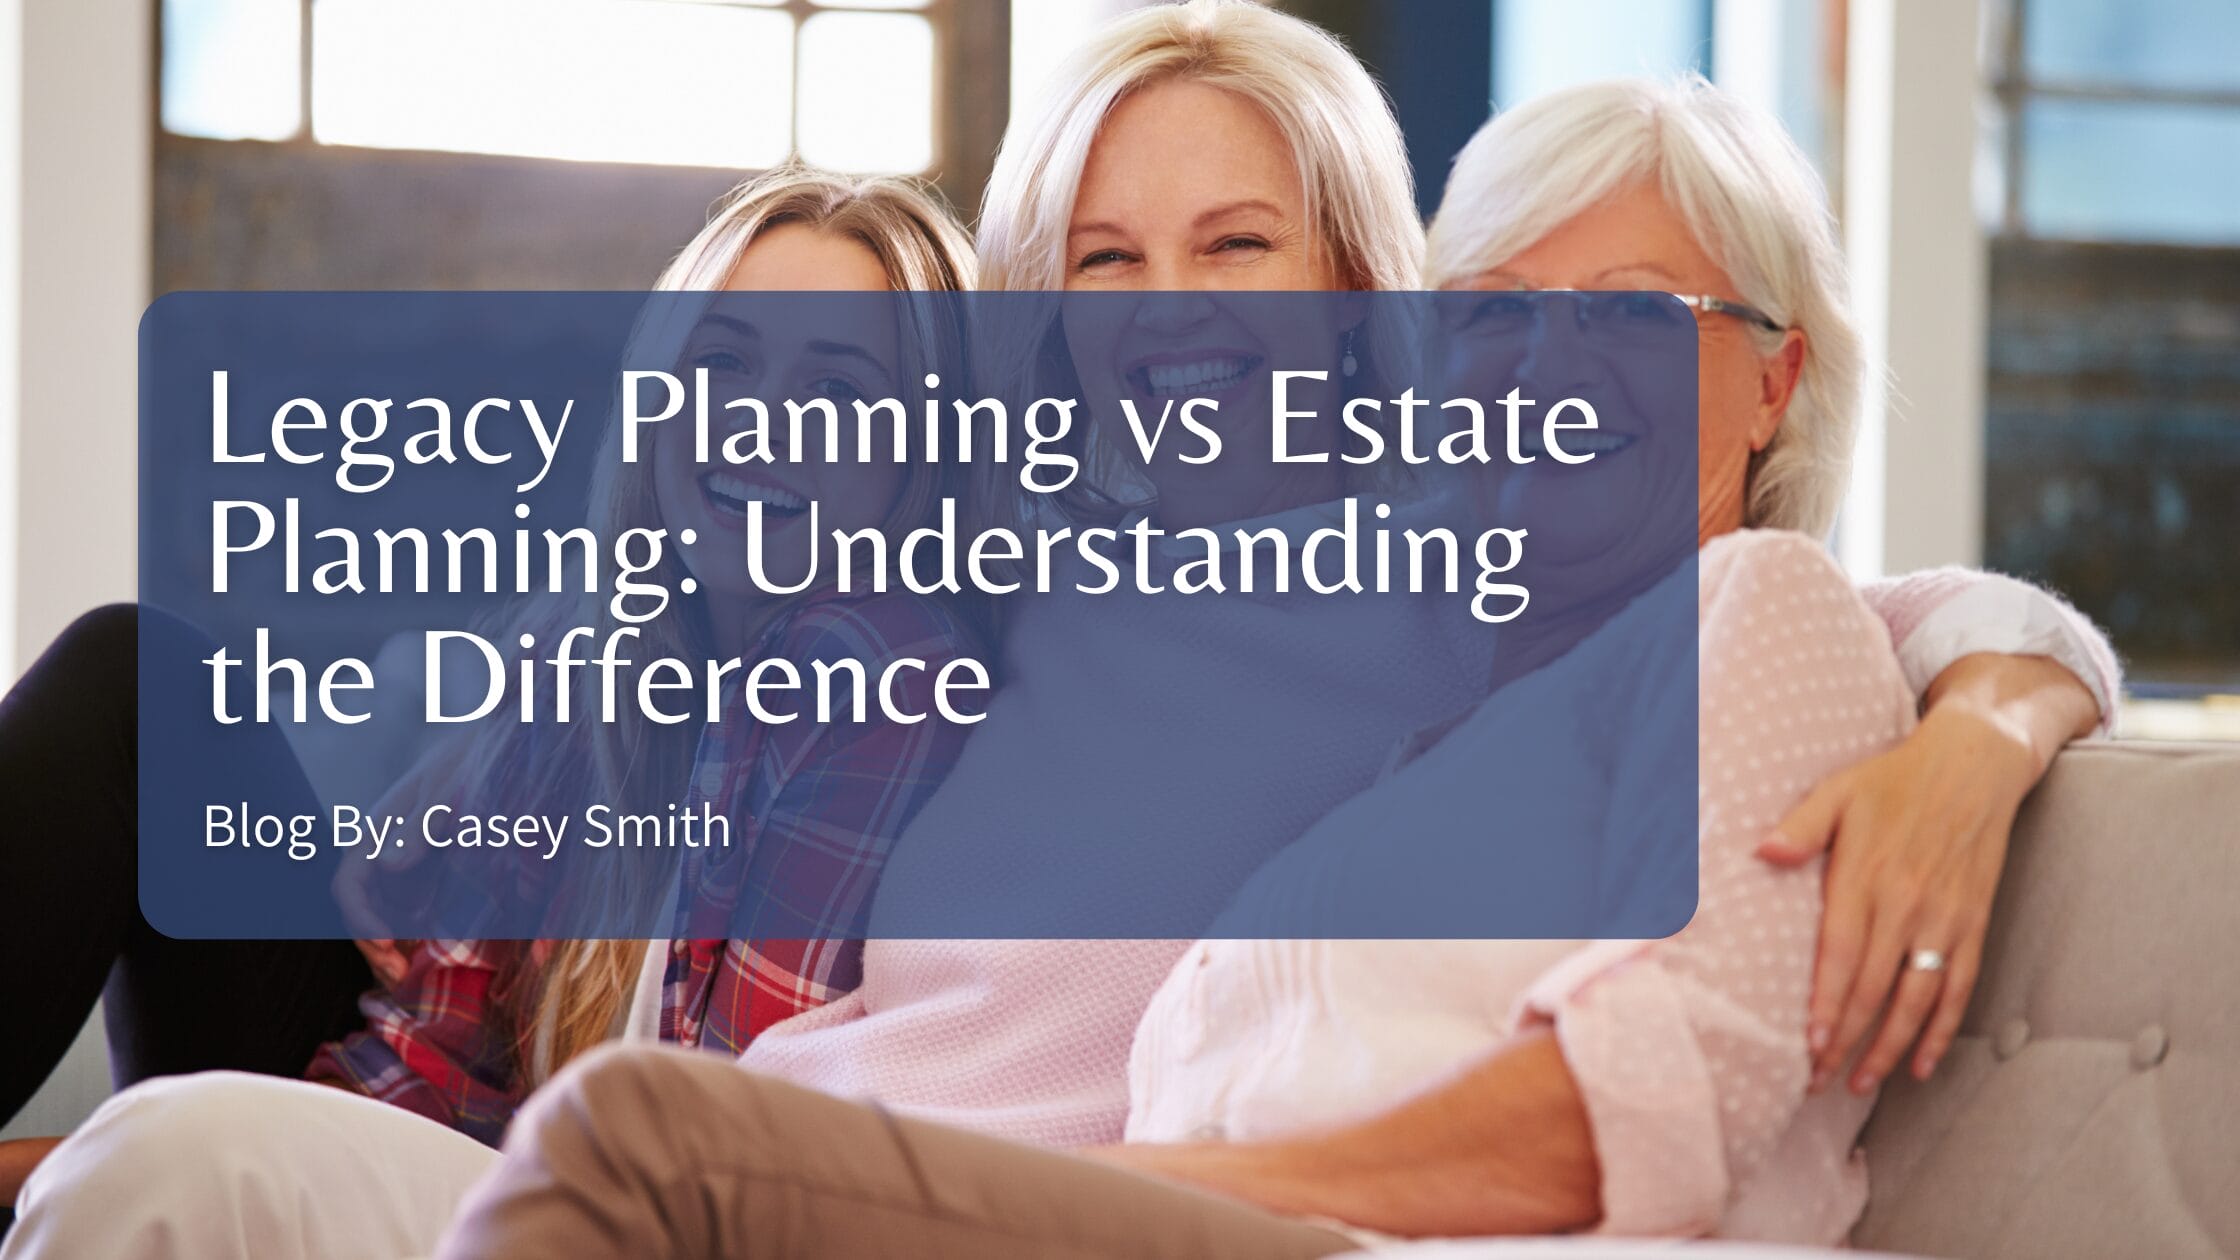 Legacy Planning vs Estate Planning: Understanding the Difference